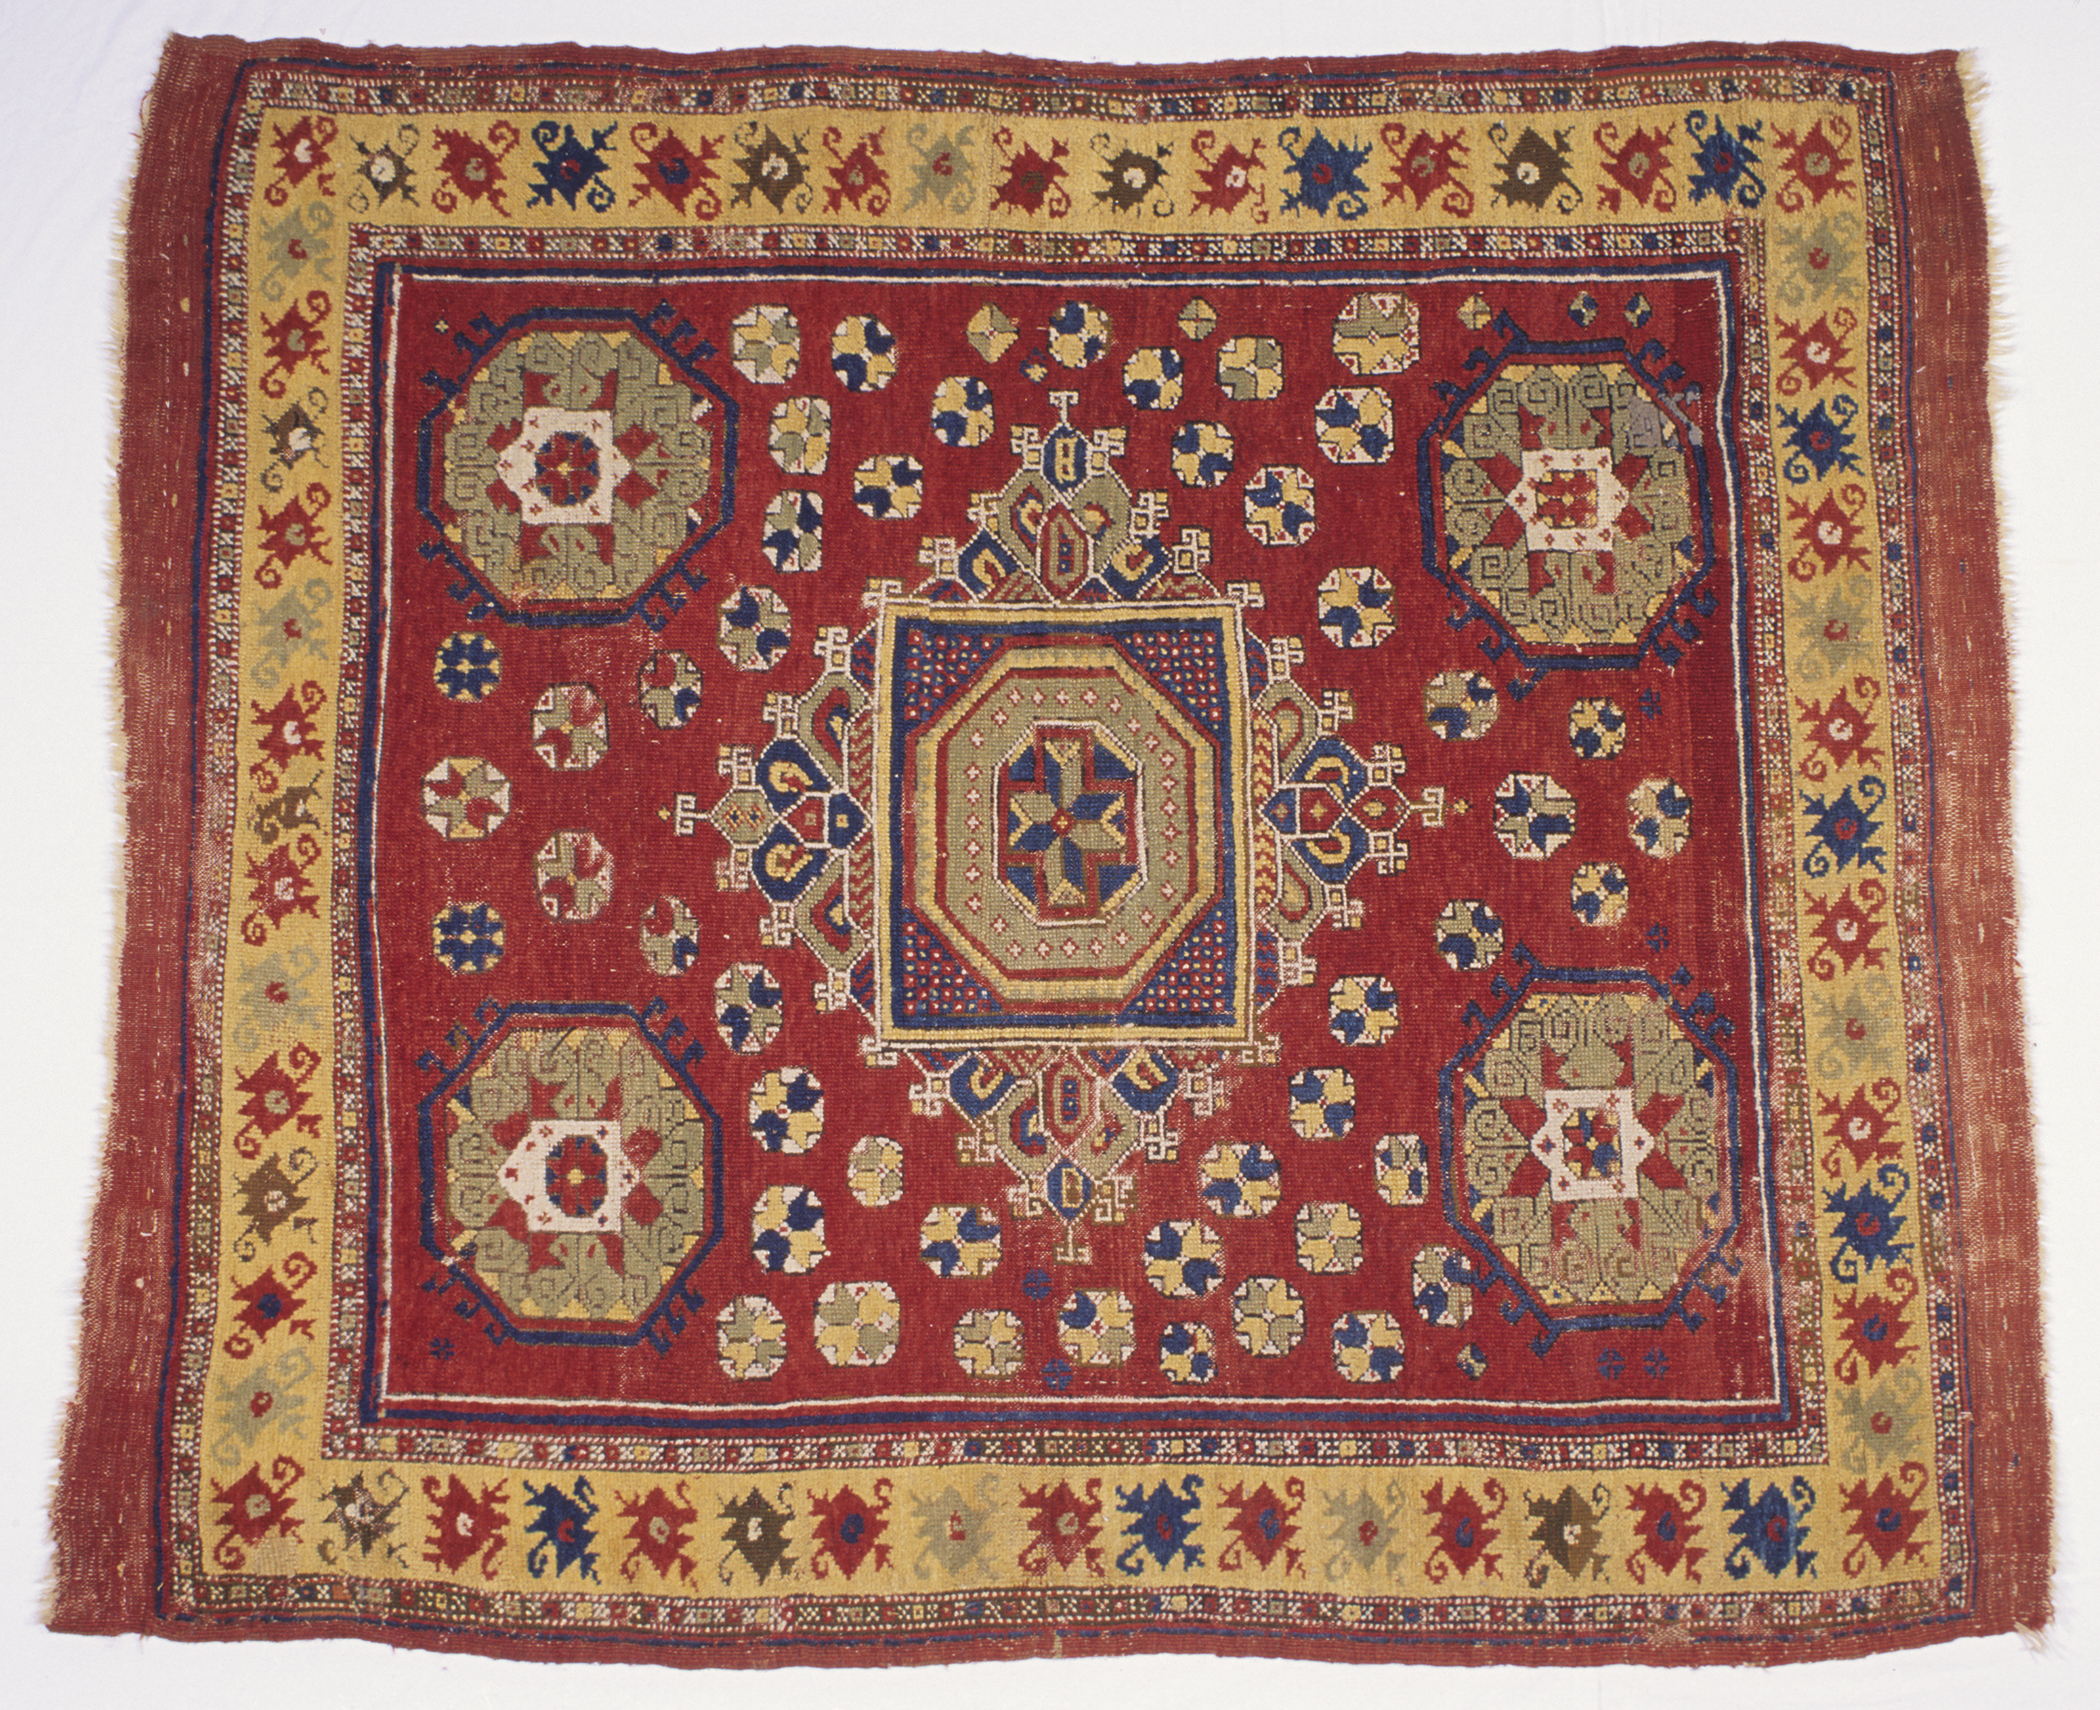 1954.0062.002 Rug, view 1